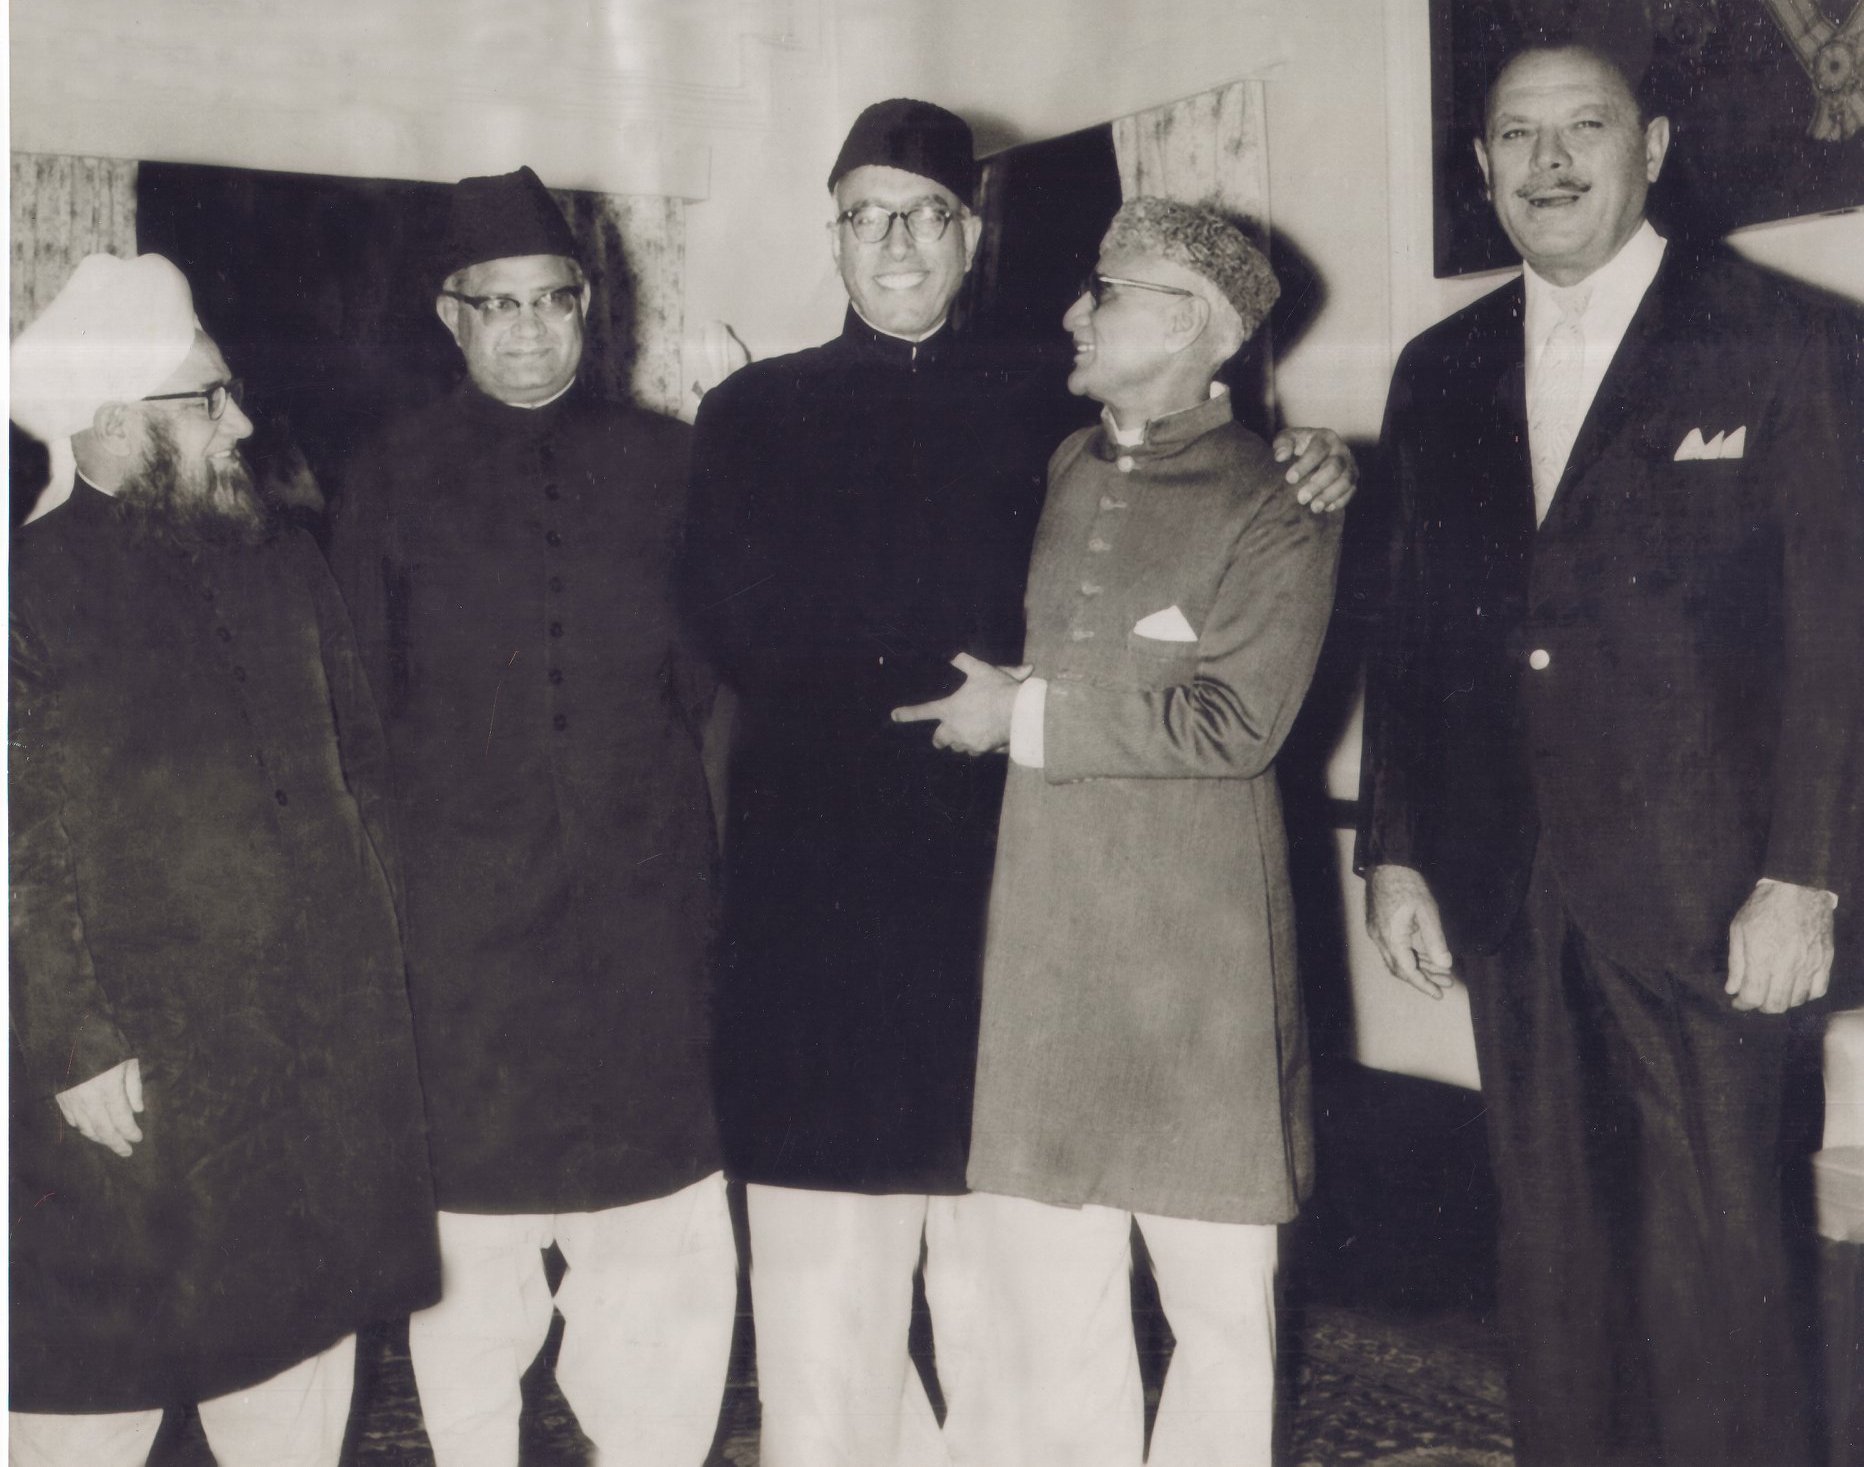 Sheikh Mohammad Abdullah with Ayub Khan and others